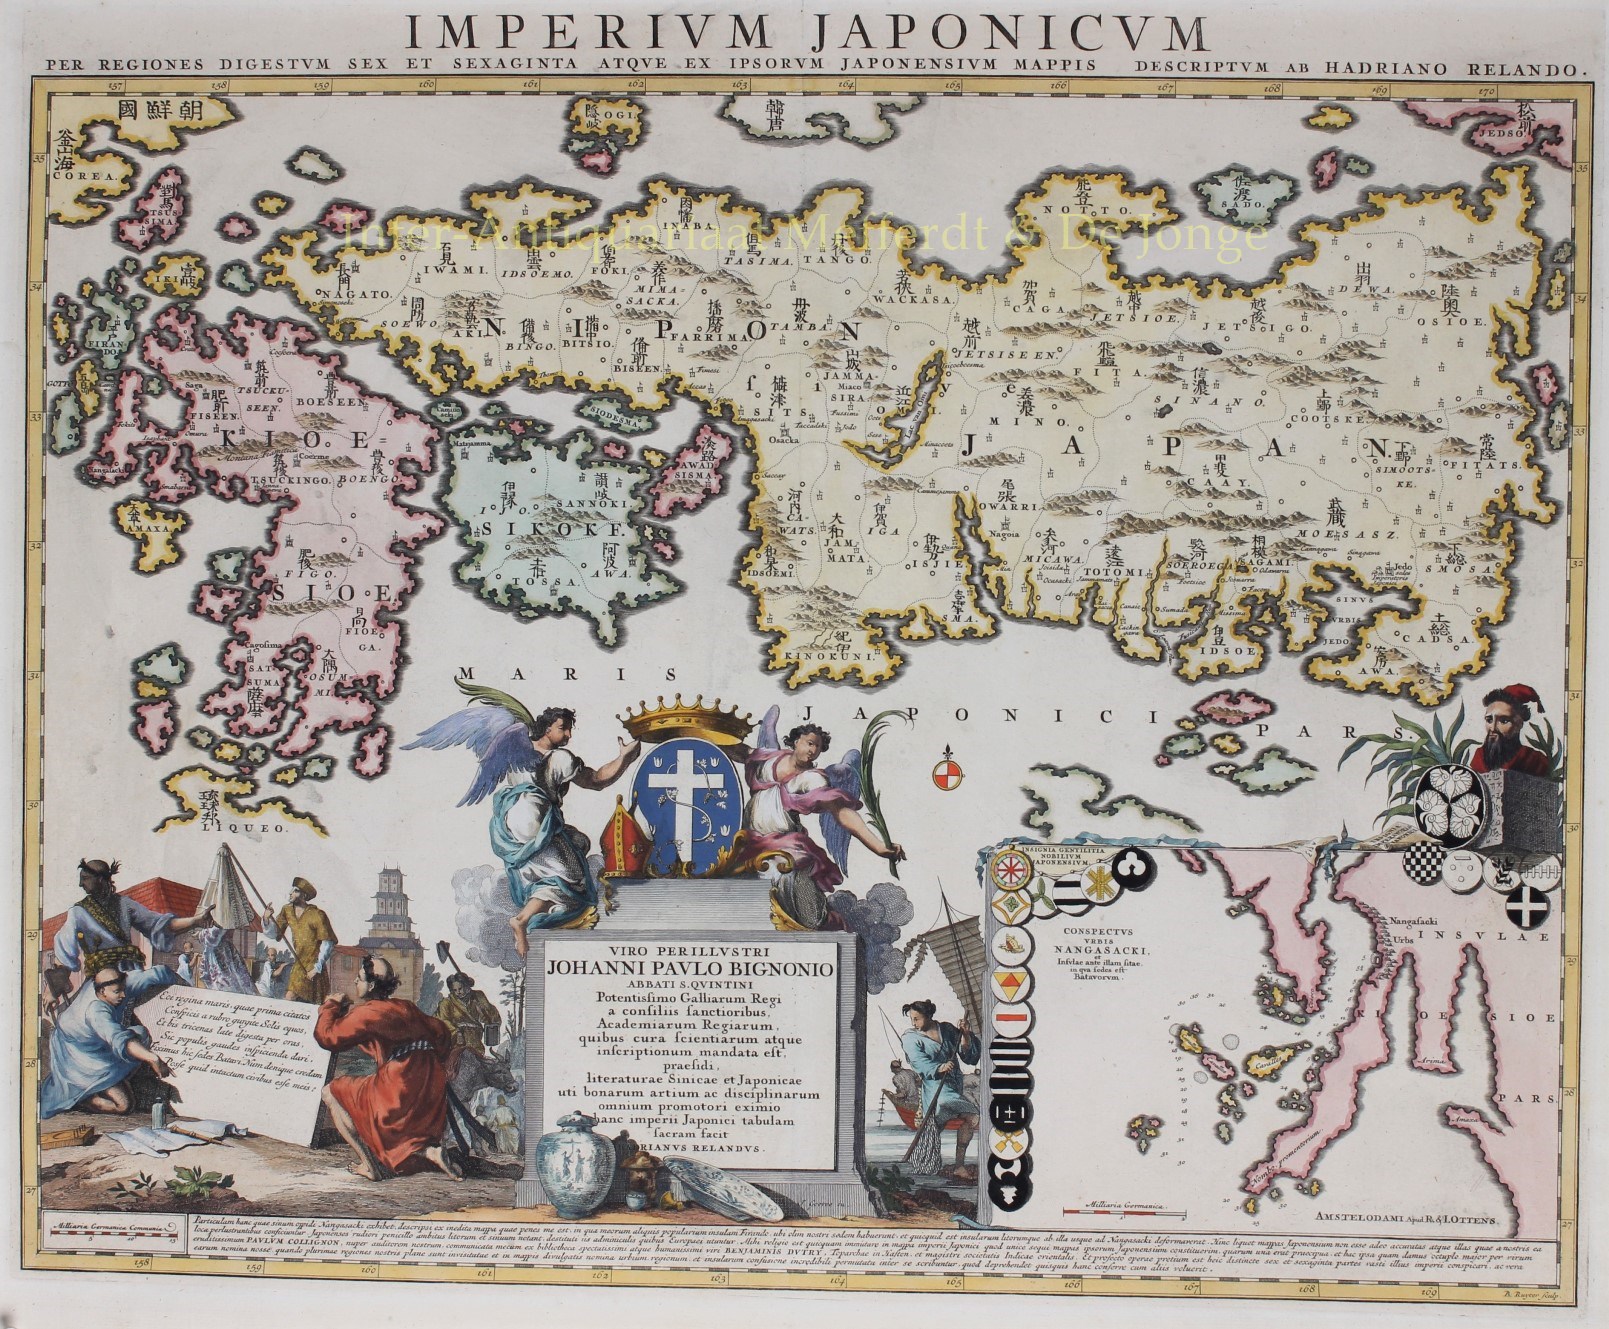  - Empire of Japan - Reinier and Josua Ottens, after 1720